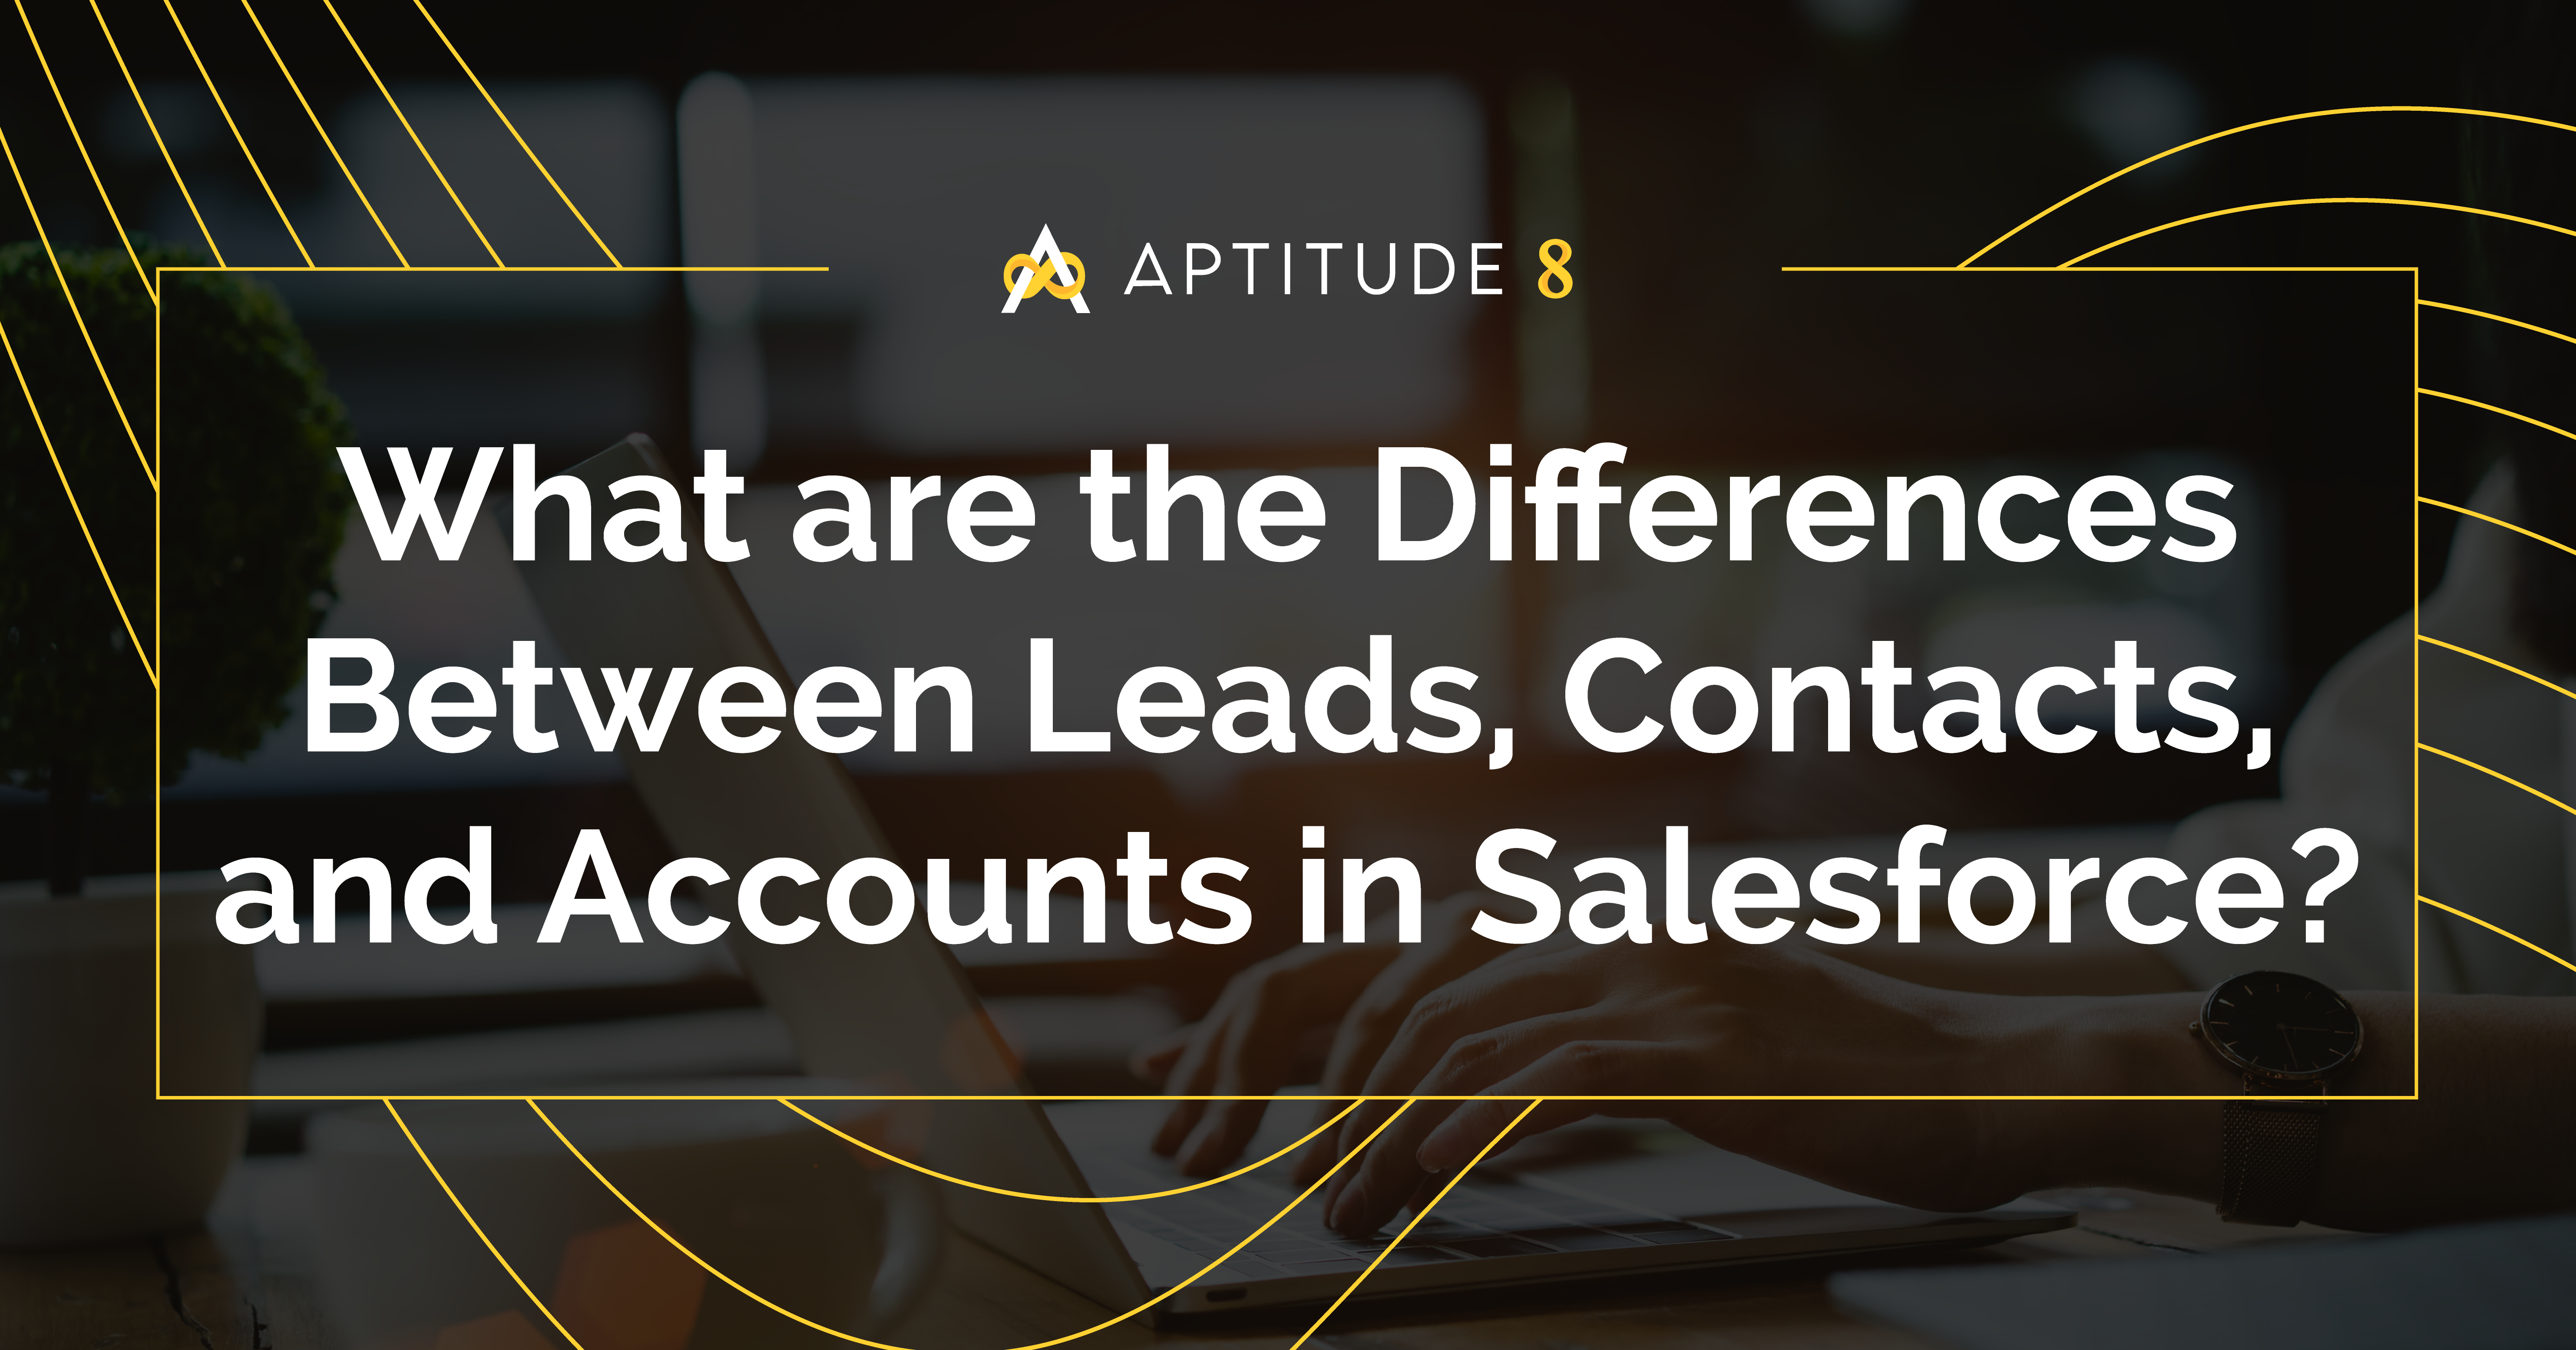 What are the Differences Between Leads, Contacts, and Accounts in Salesforce?